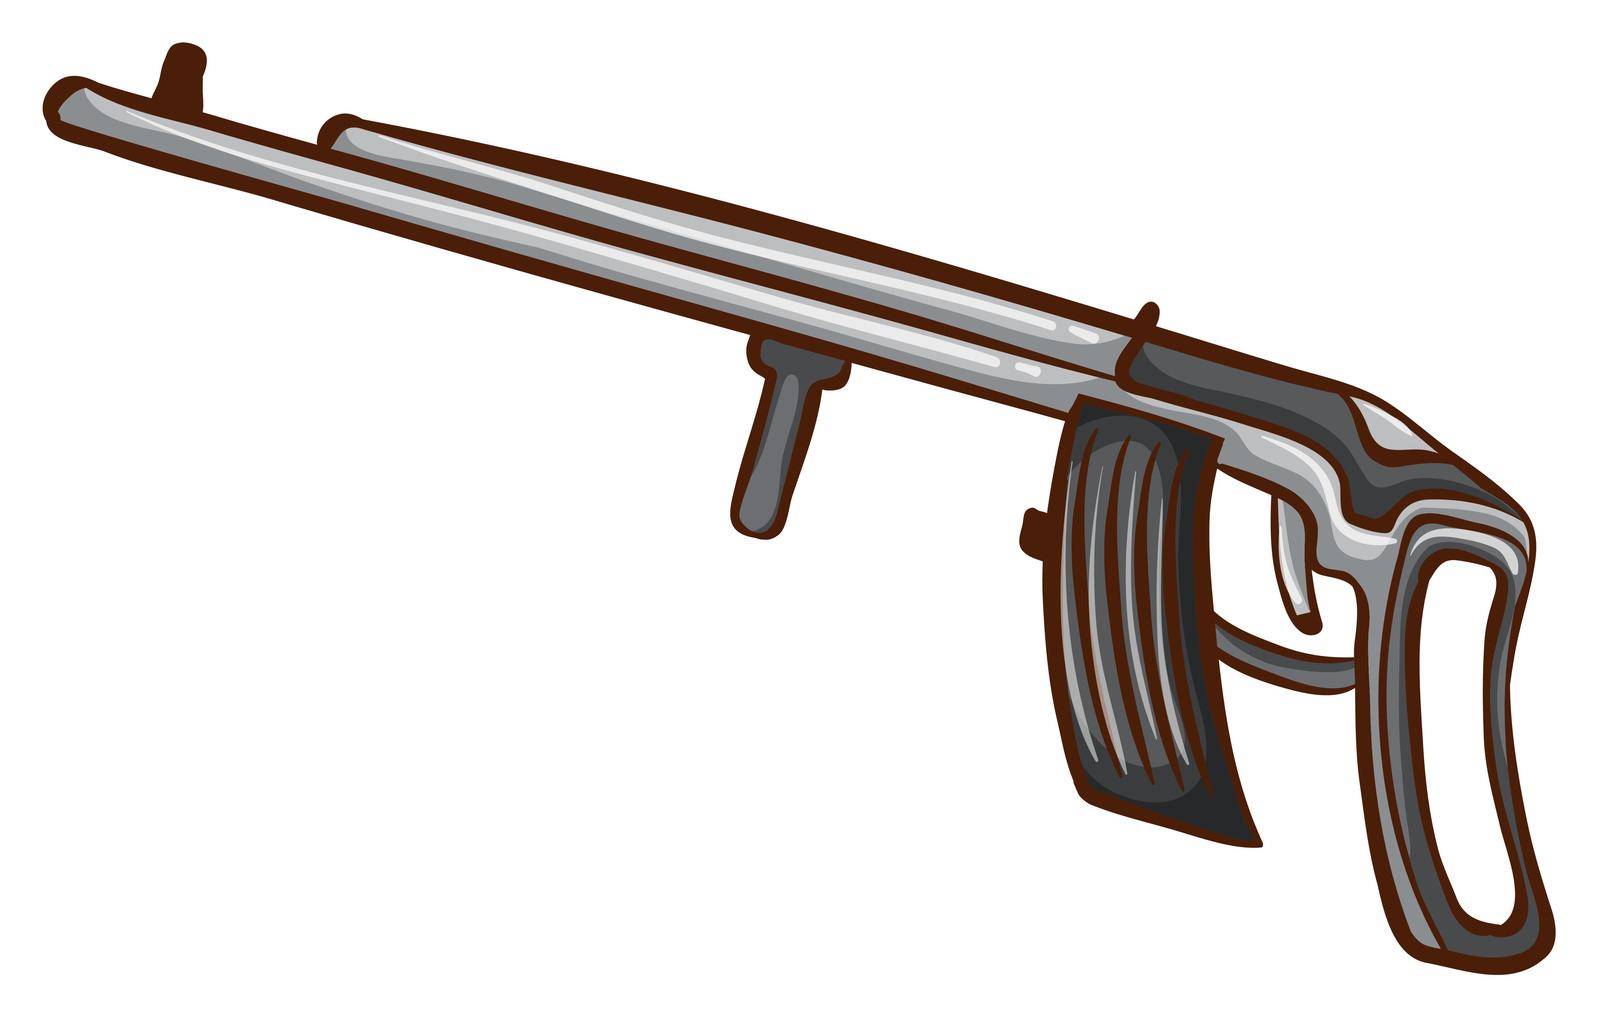 Illustration of a simple sketch of a soldier's gun on a white background